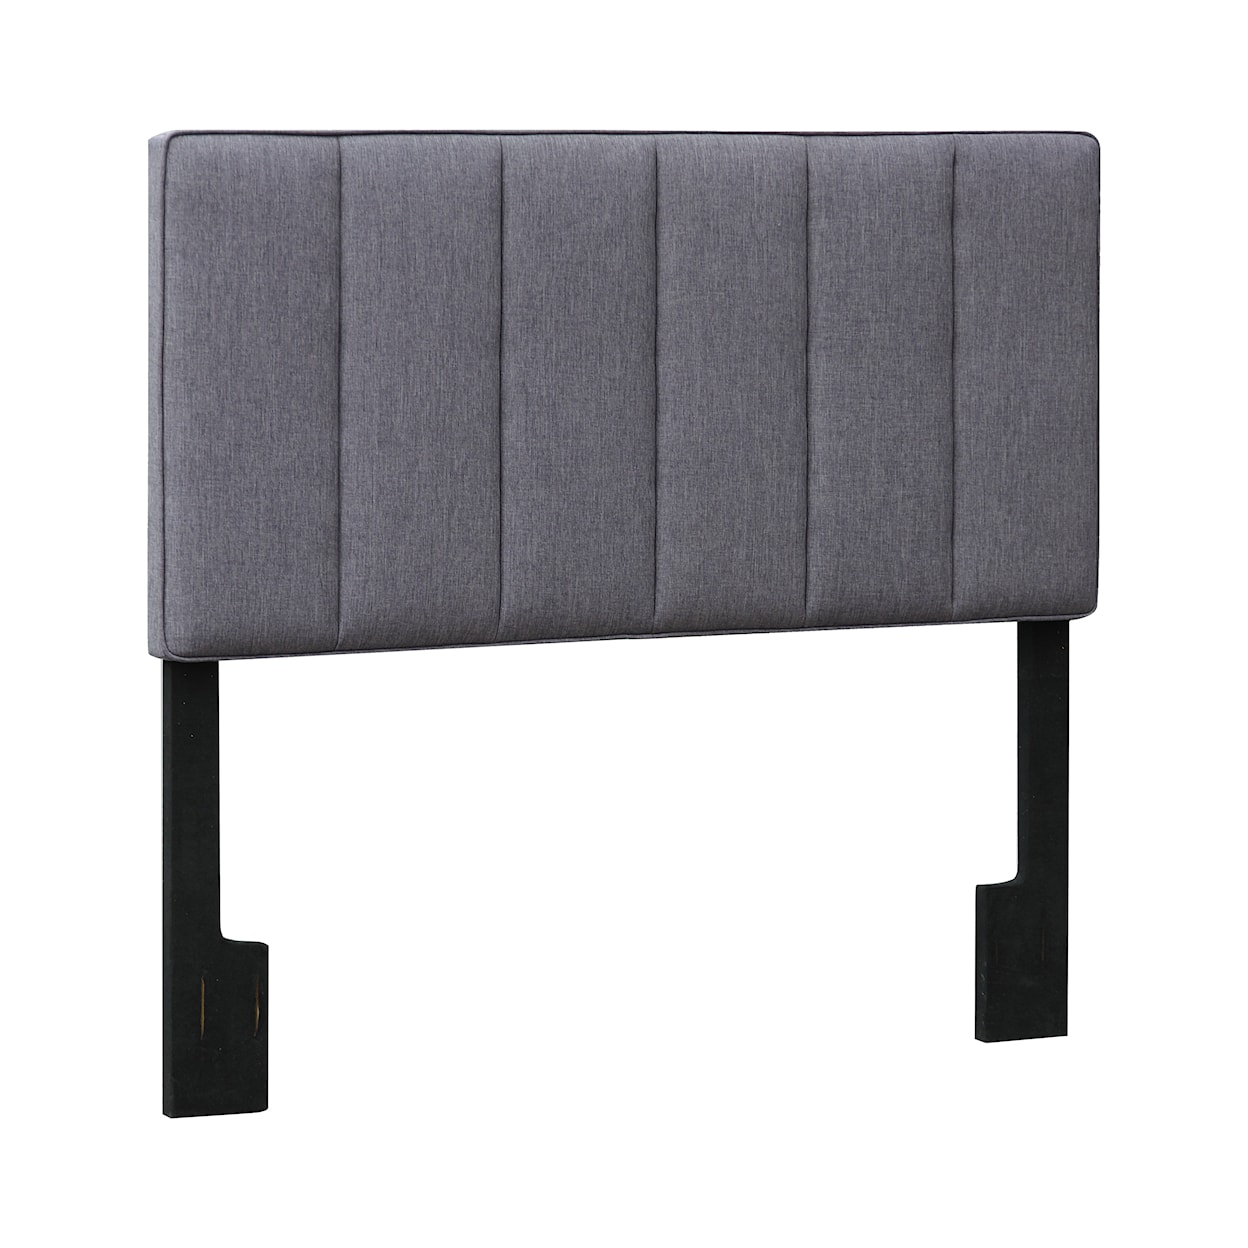 Accentrics Home Fashion Beds Full/Queen Upholstered Headboard